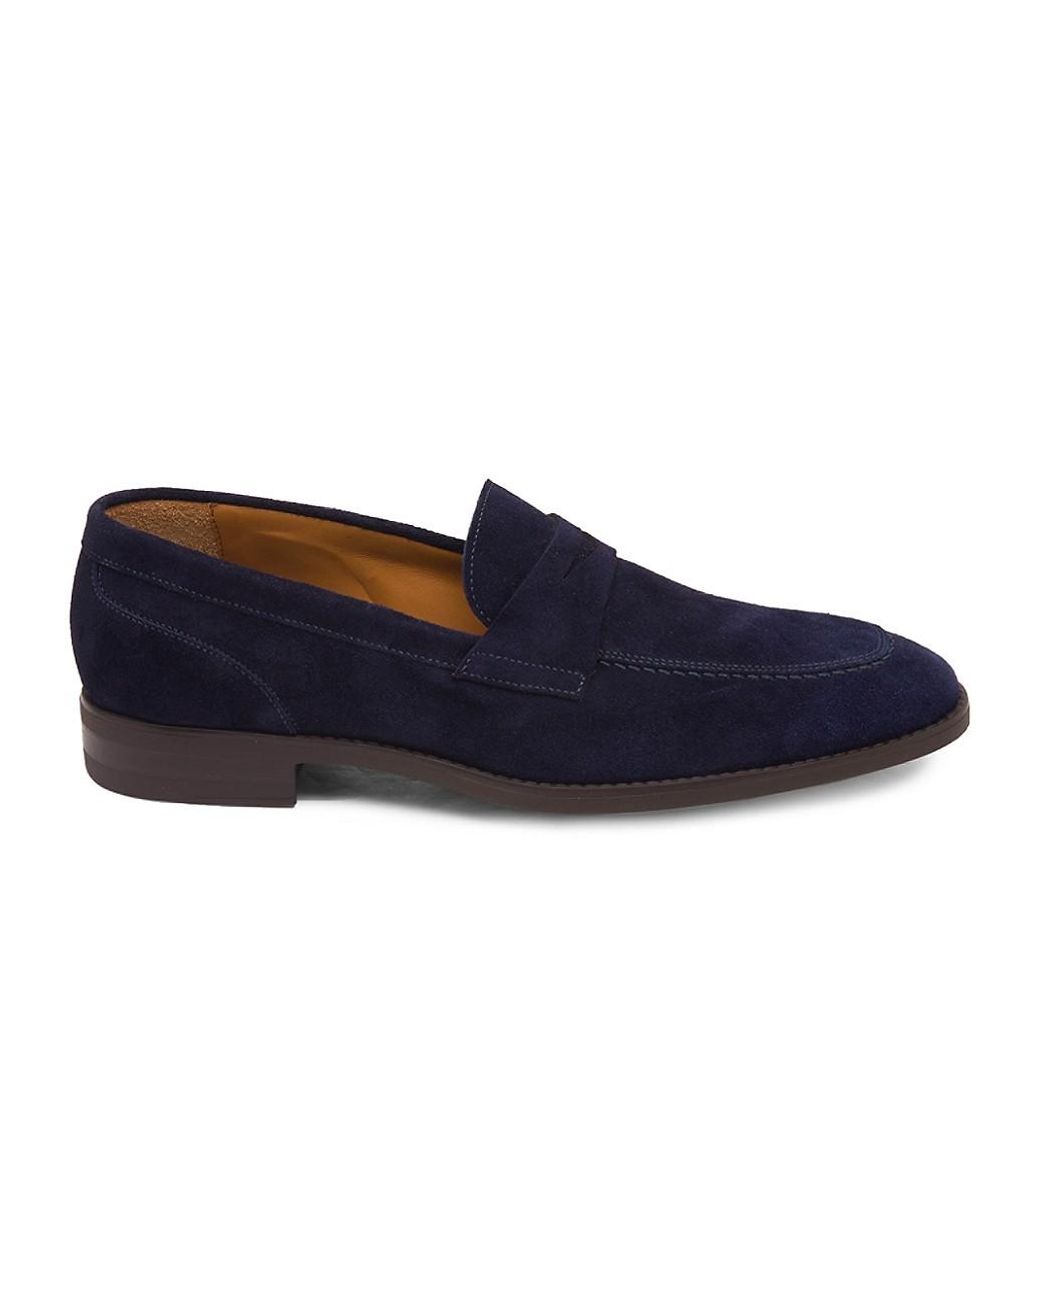 Bruno Magli Brando Suede Penny Loafers in Navy (Blue) for Men - Lyst